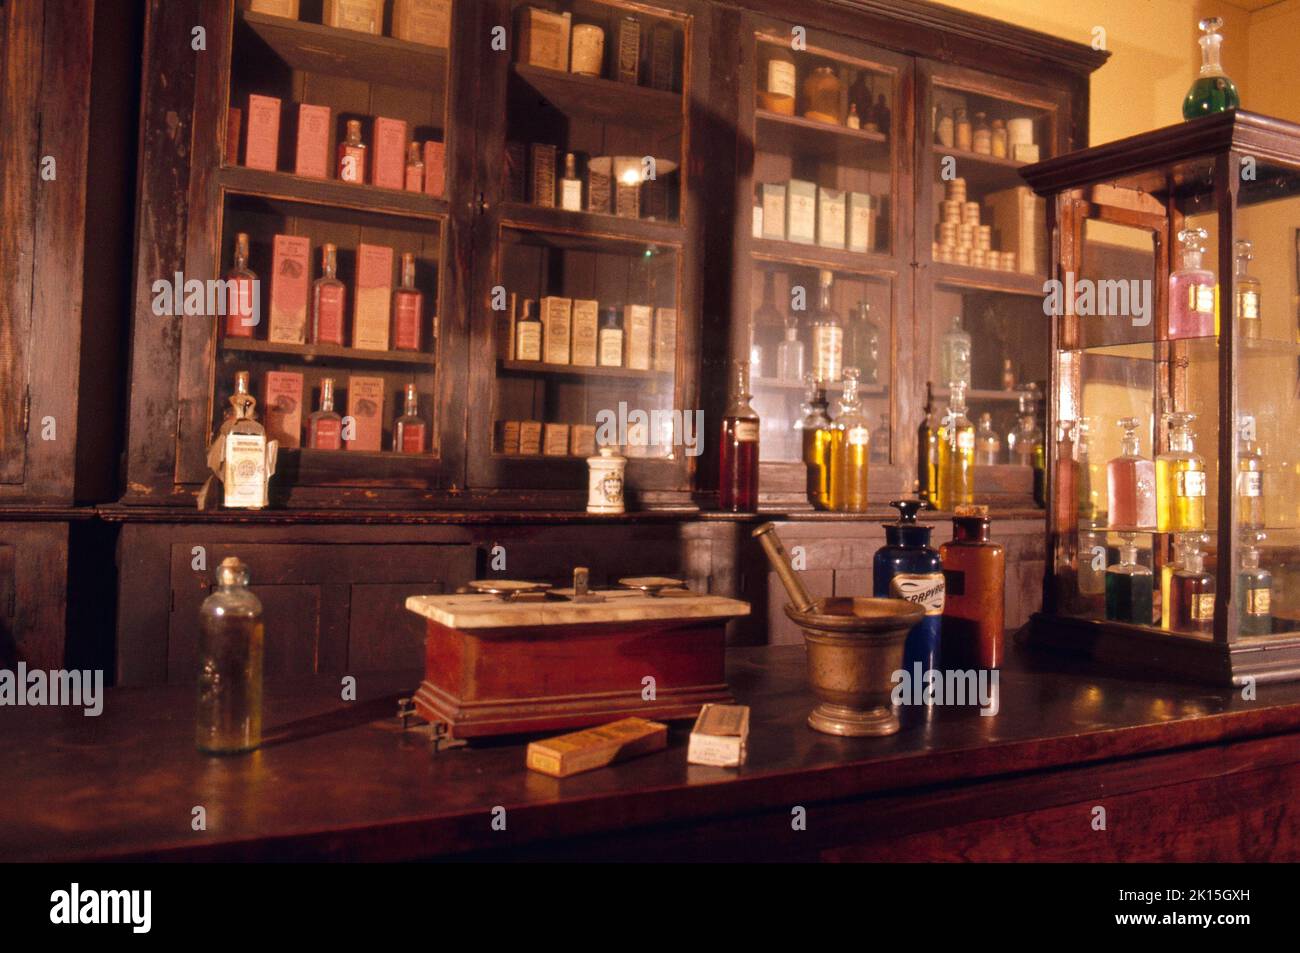 The Country Doctor Museum in Bailey, North Carolina, is the oldest museum in the United States dedicated to the history of America's rural health care. This 19th century drug store is now a display. Stock Photo